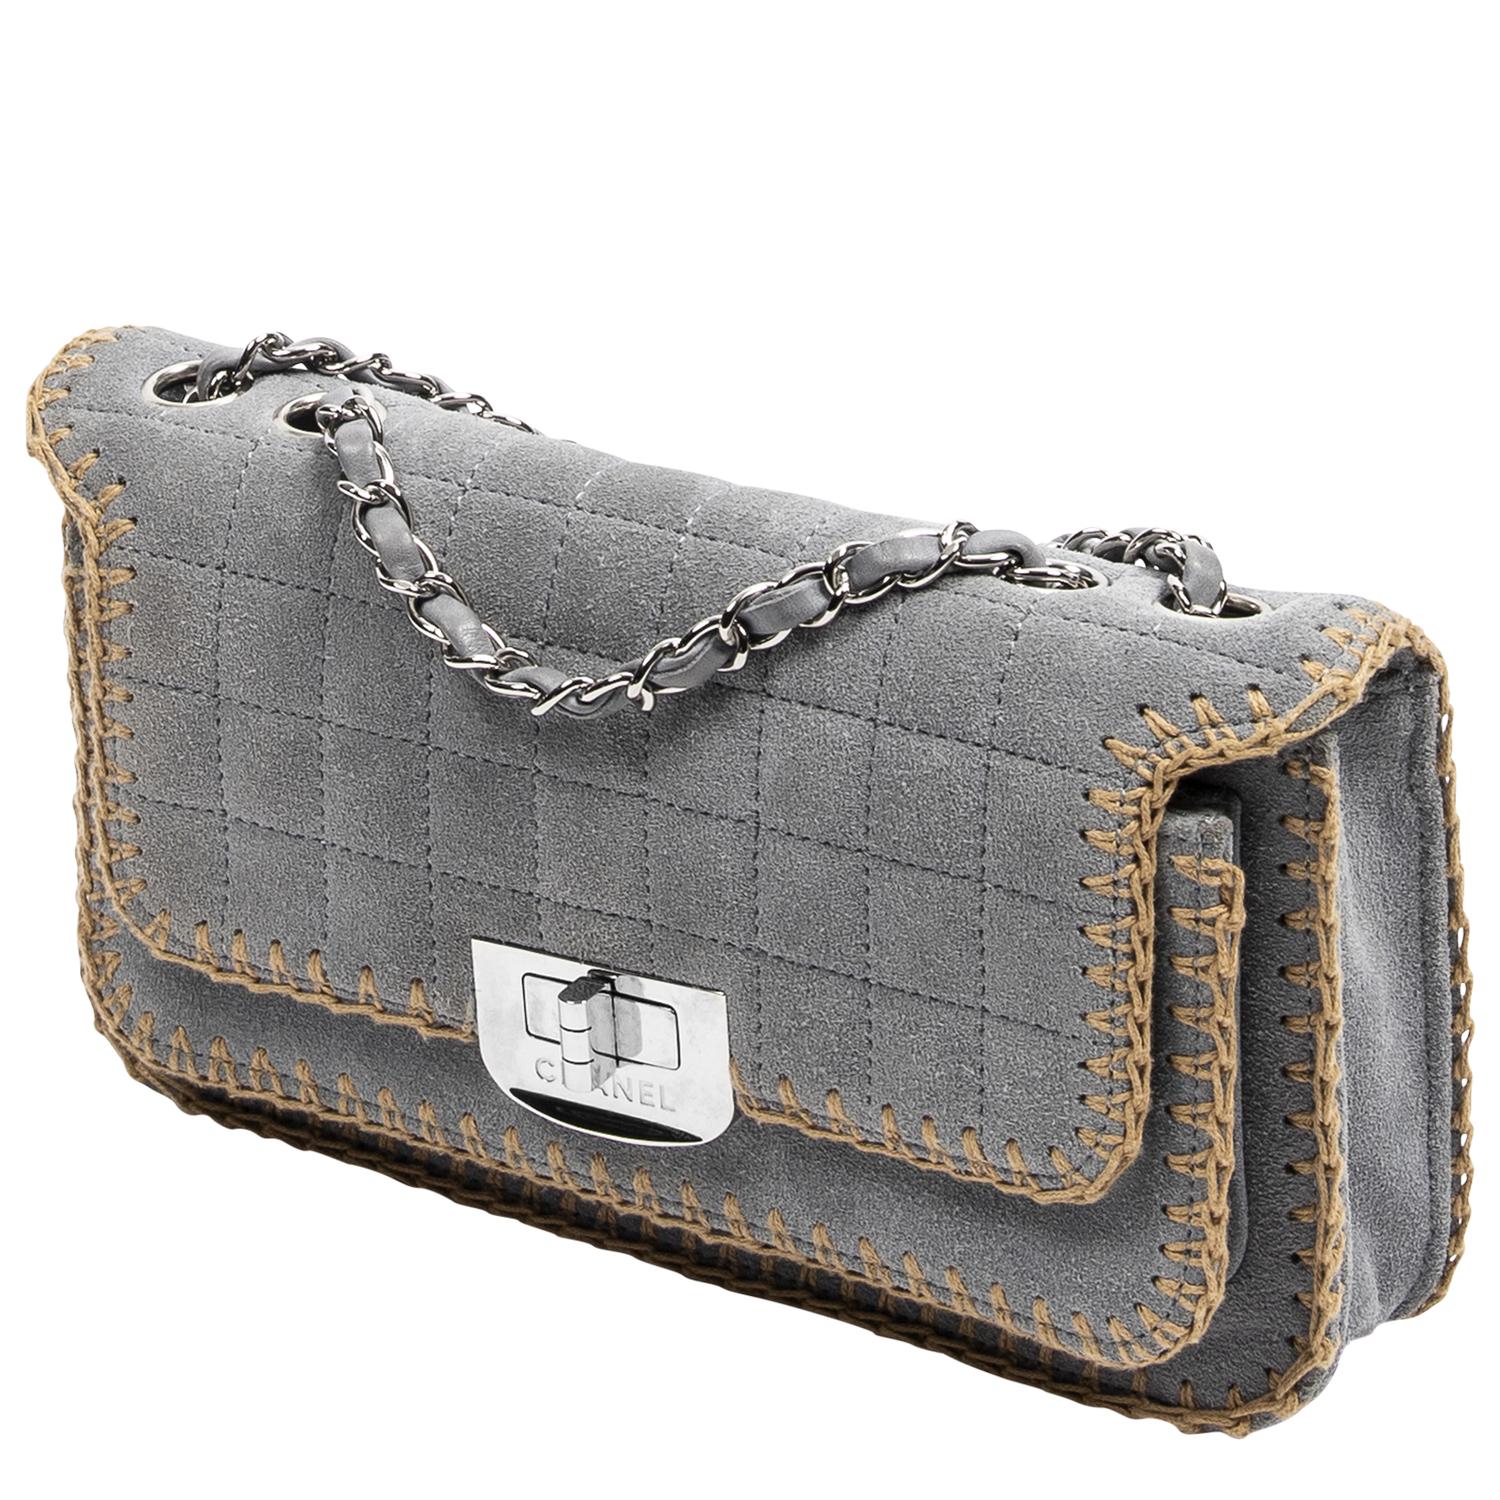 We can't believe our eyes! This rare vintage Chanel is detailed in light grey quilted suede with contrast stitching, silver-tone hardware, and dual interwoven chainlink shoulder straps. The Mademoiselle turnlock closure opens to a stunning grosgrain